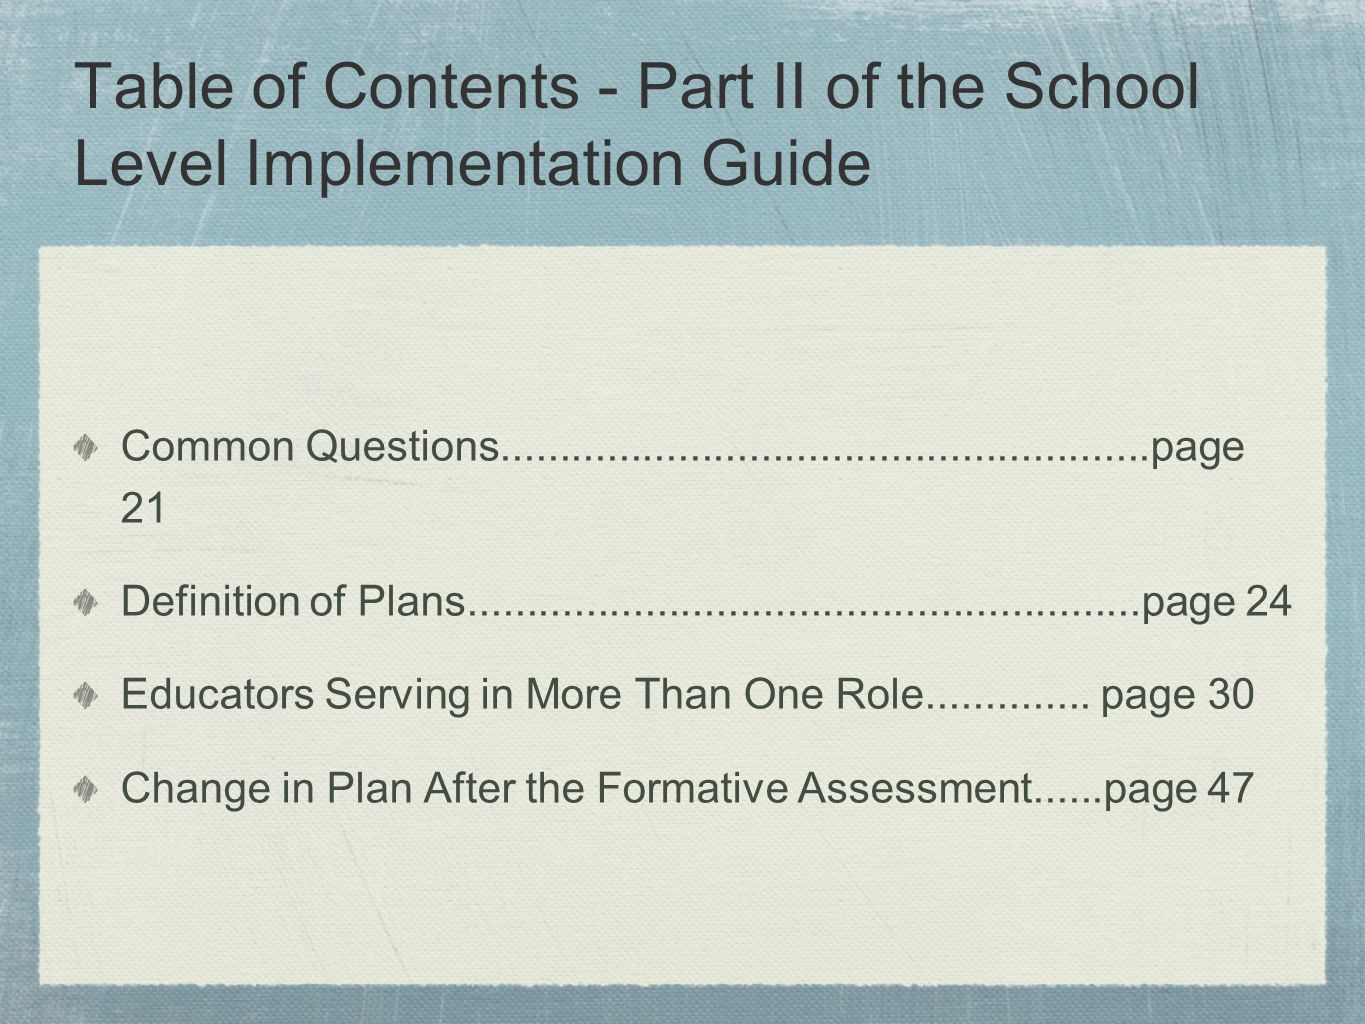 Table of Contents - Part II of the School Level Implementation Guide Common Questions page 21 Definition of Plans page 24 Educators Serving in More Than One Role